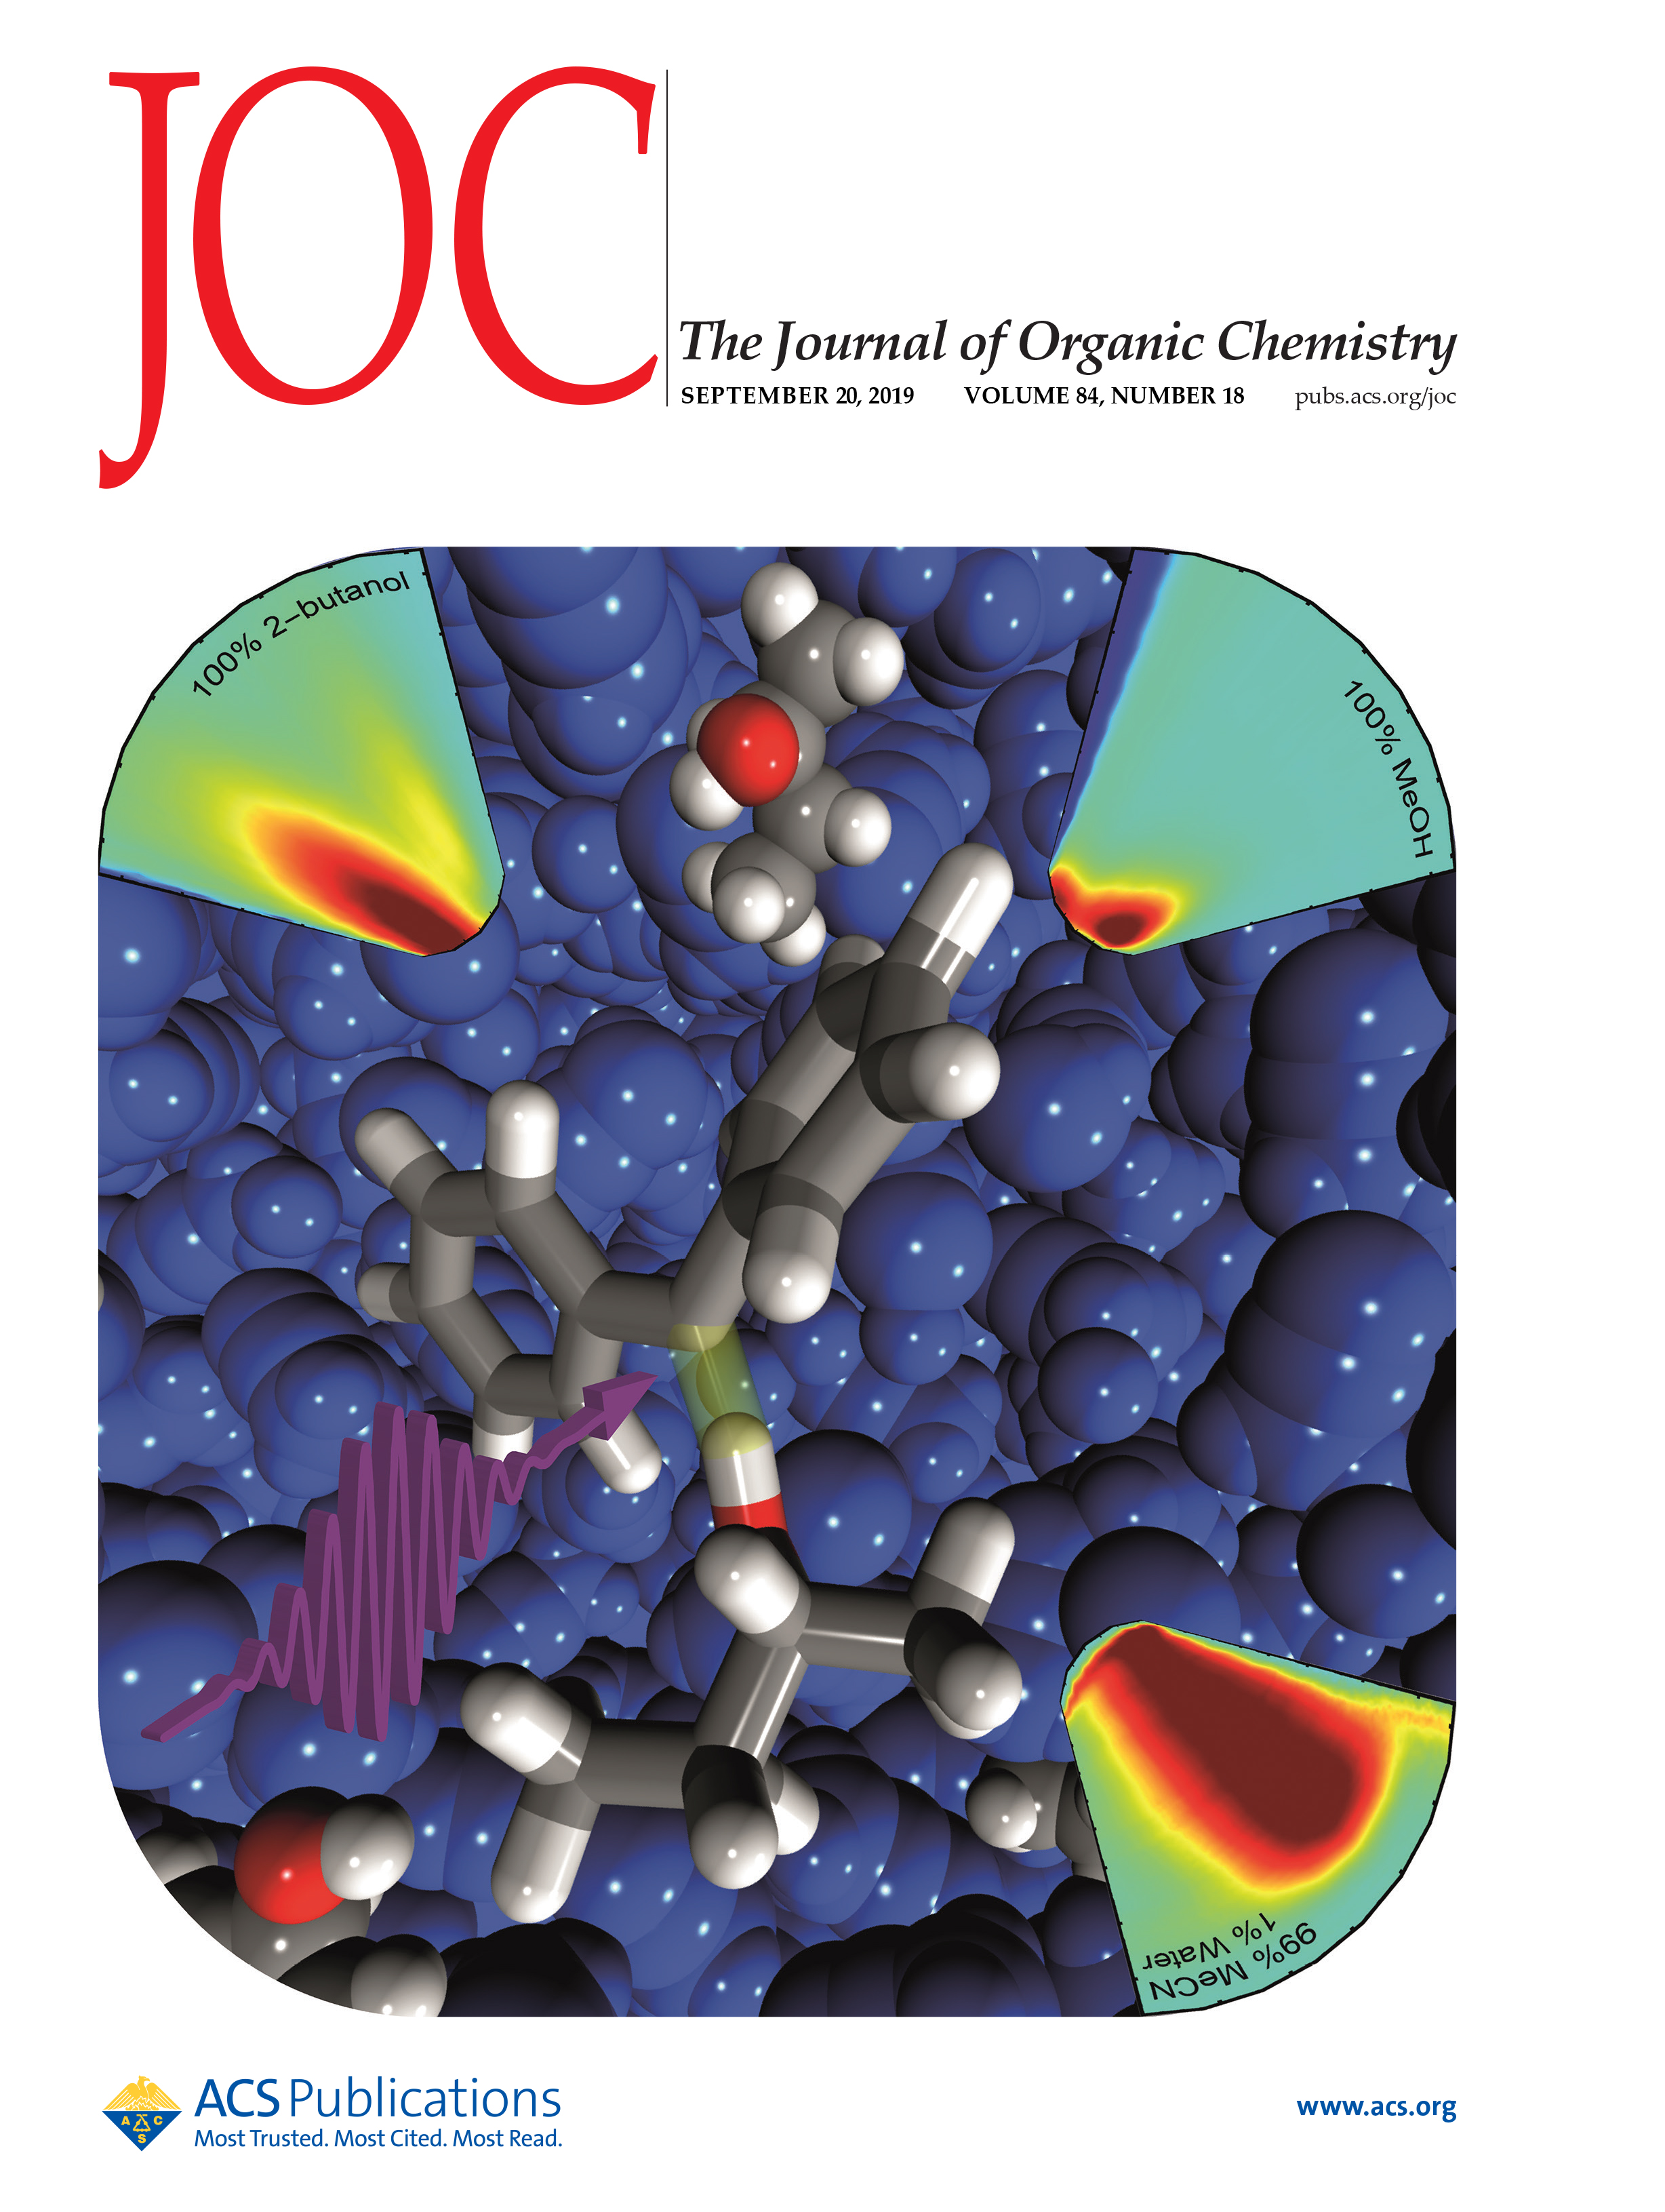 Cover of a journal